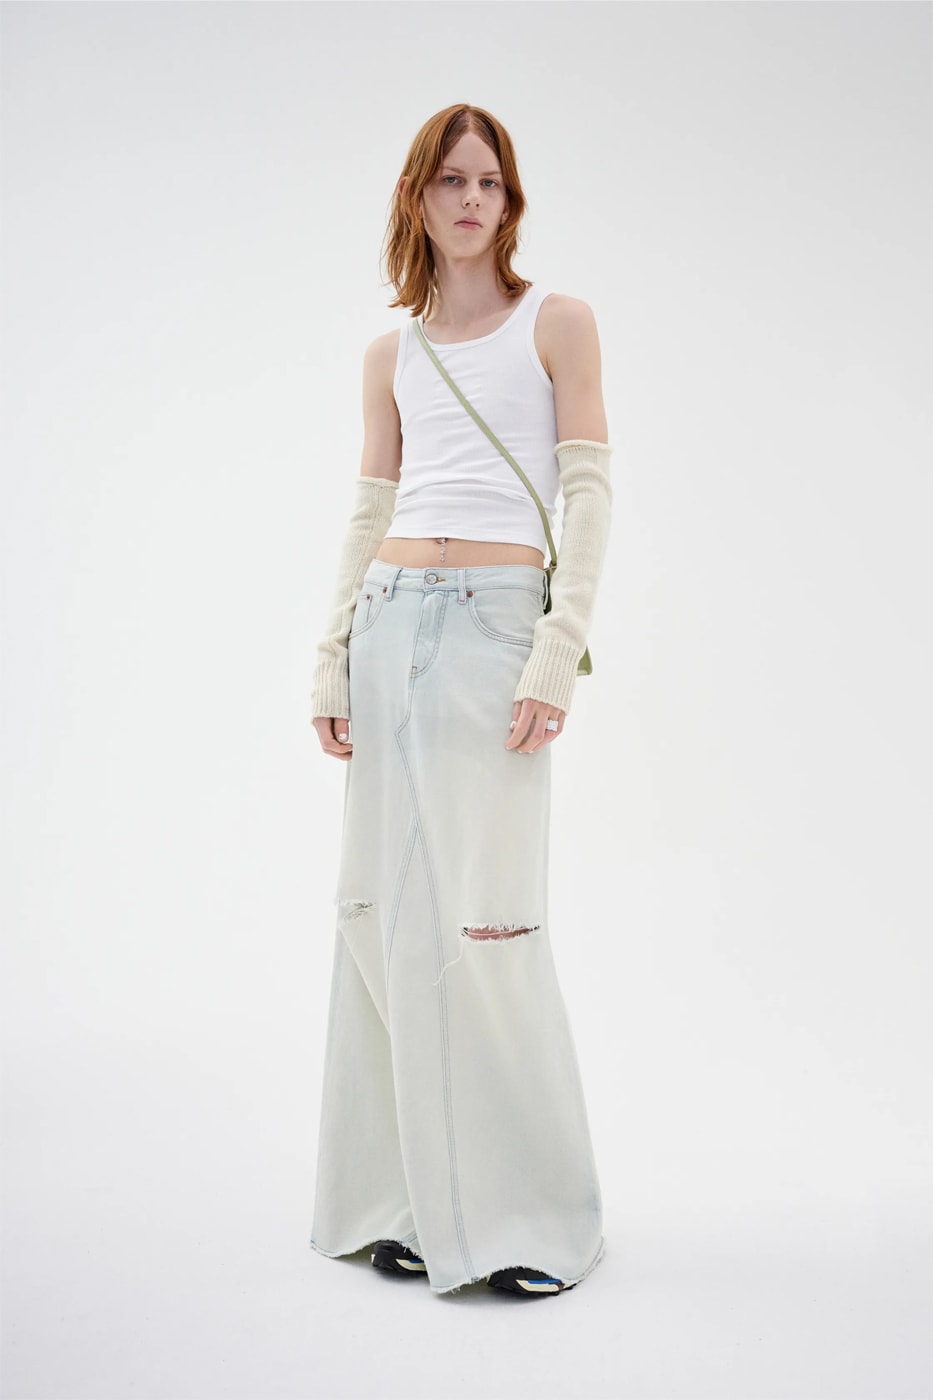 MM6 Maison Margiela Resort 2024 Is a Refreshing Take on Contemporary Tailoring collection release slouching jerseys denims subtle notes salomon